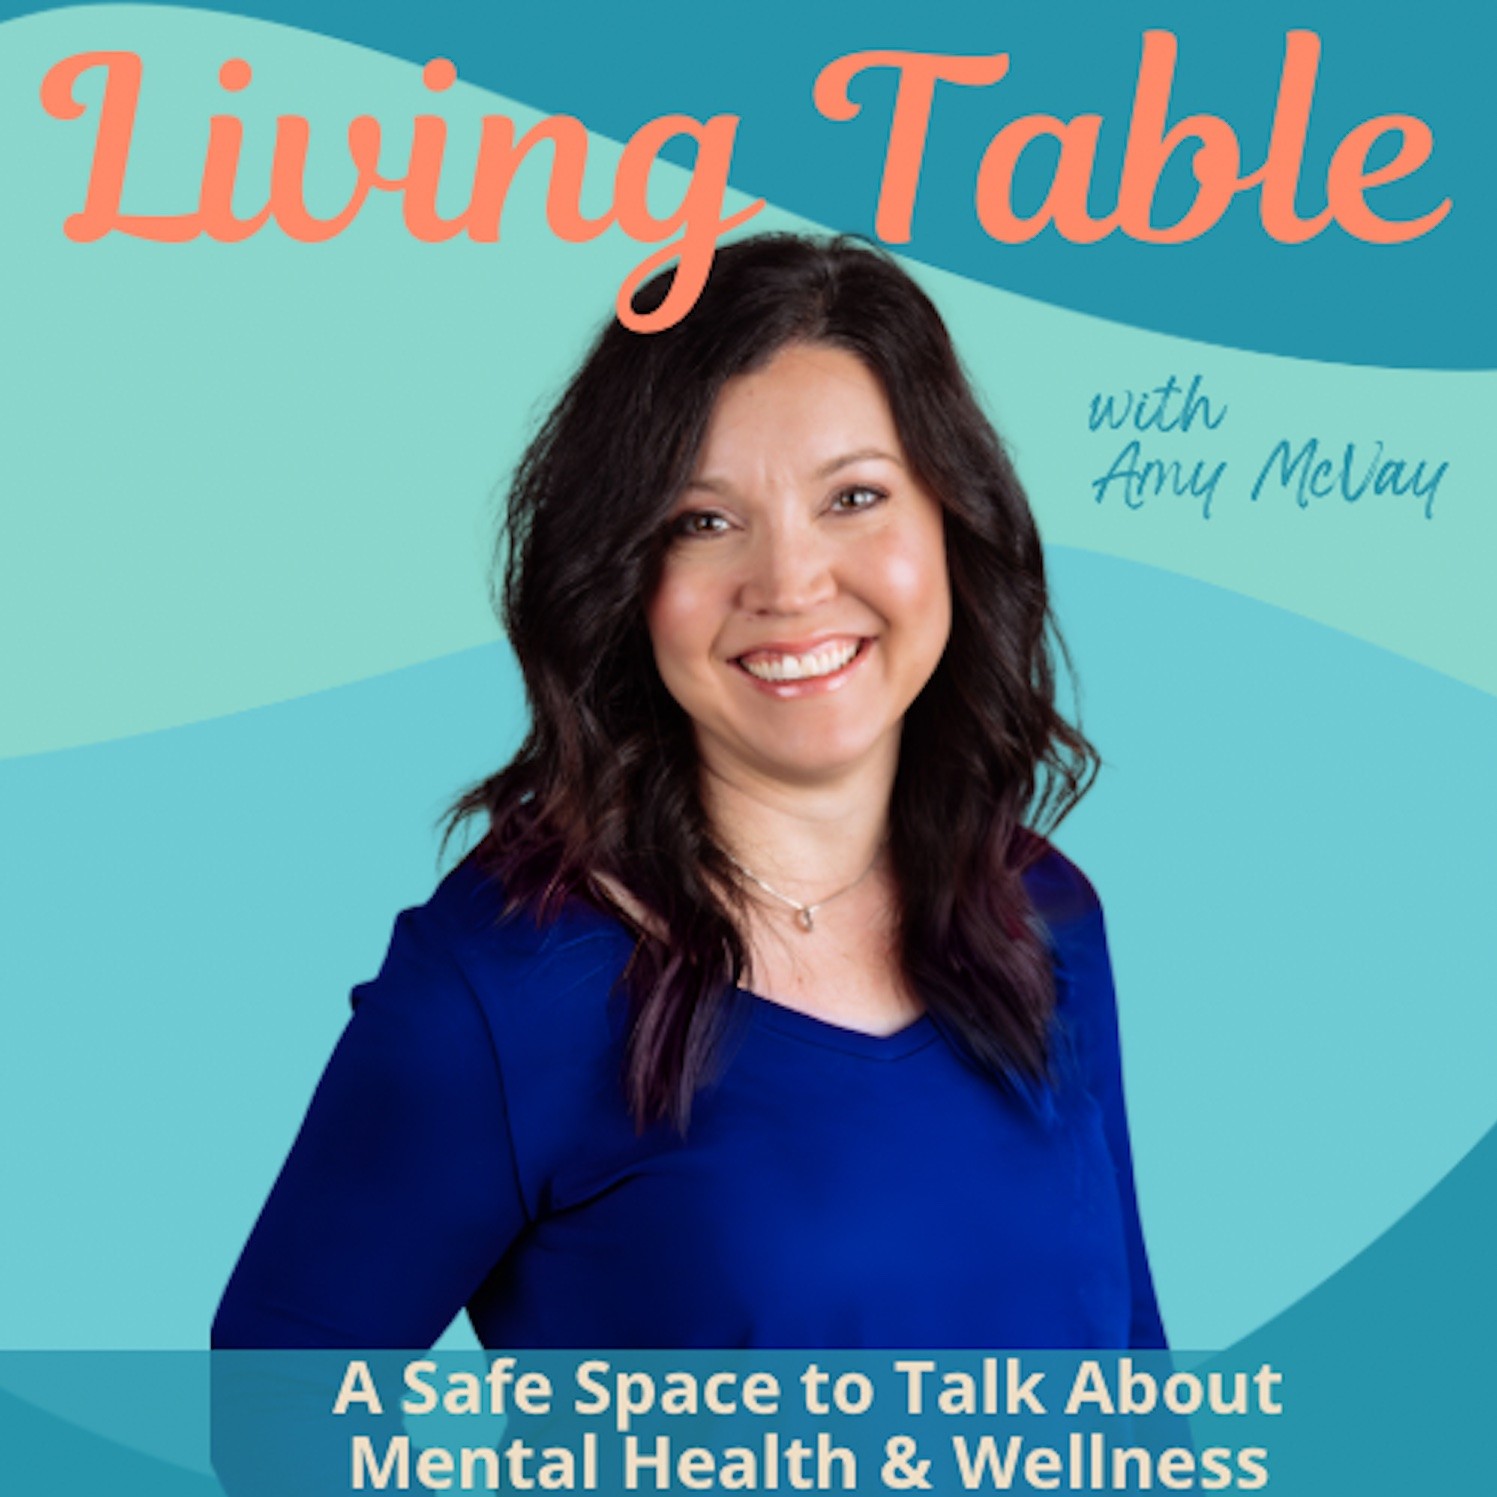 Living Table | A Safe Space To Talk About Mental Health & Wellness